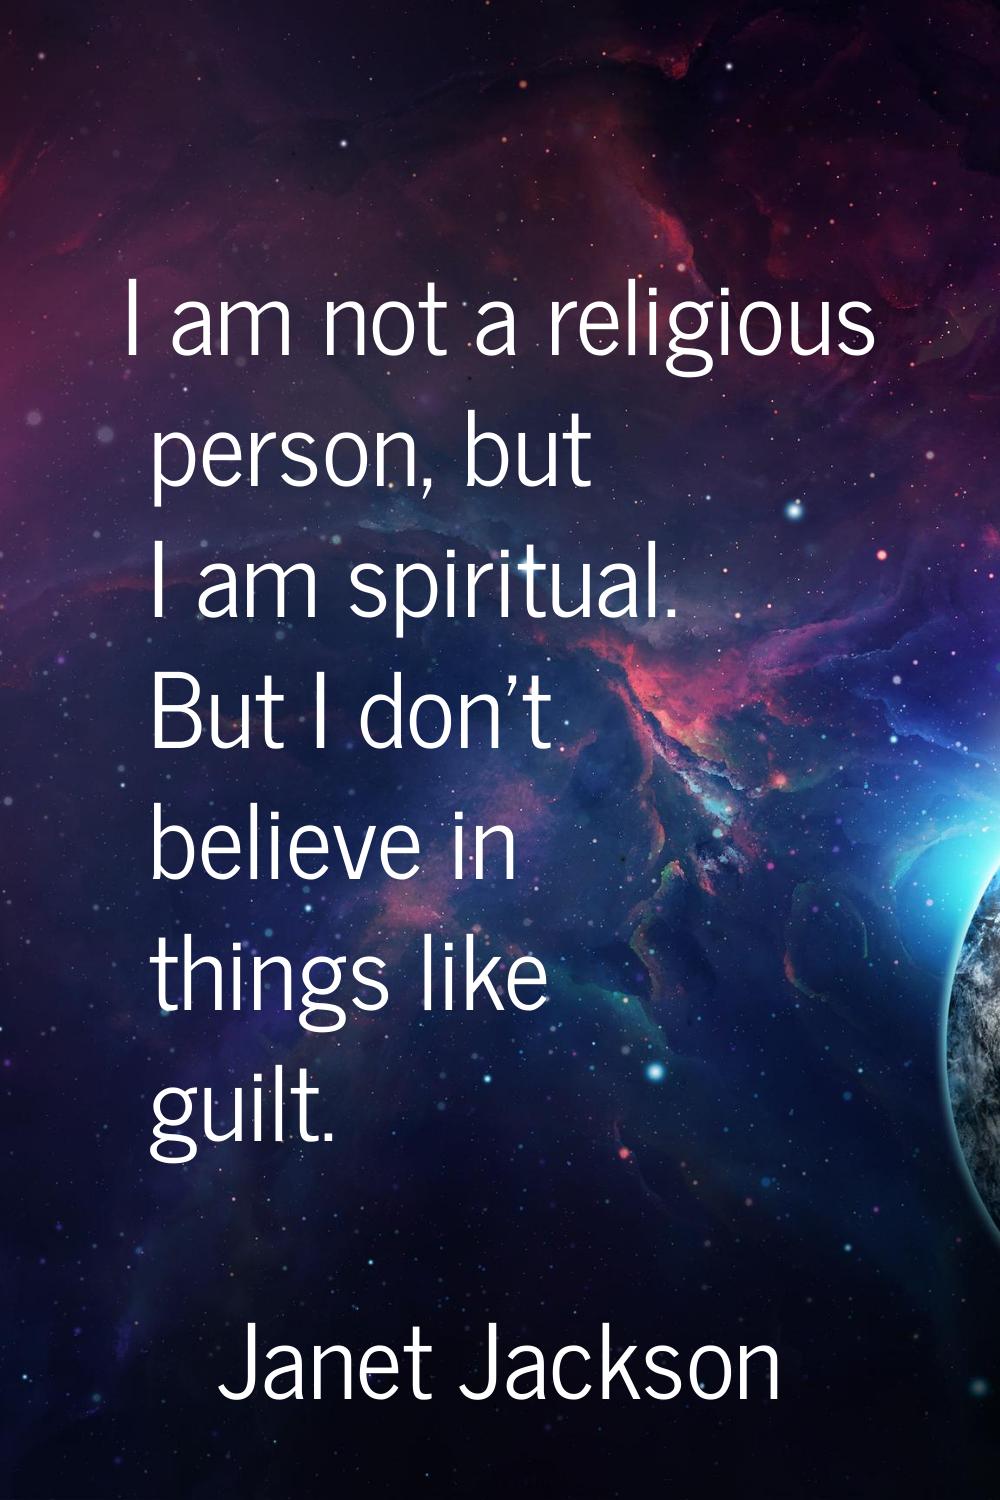 I am not a religious person, but I am spiritual. But I don't believe in things like guilt.